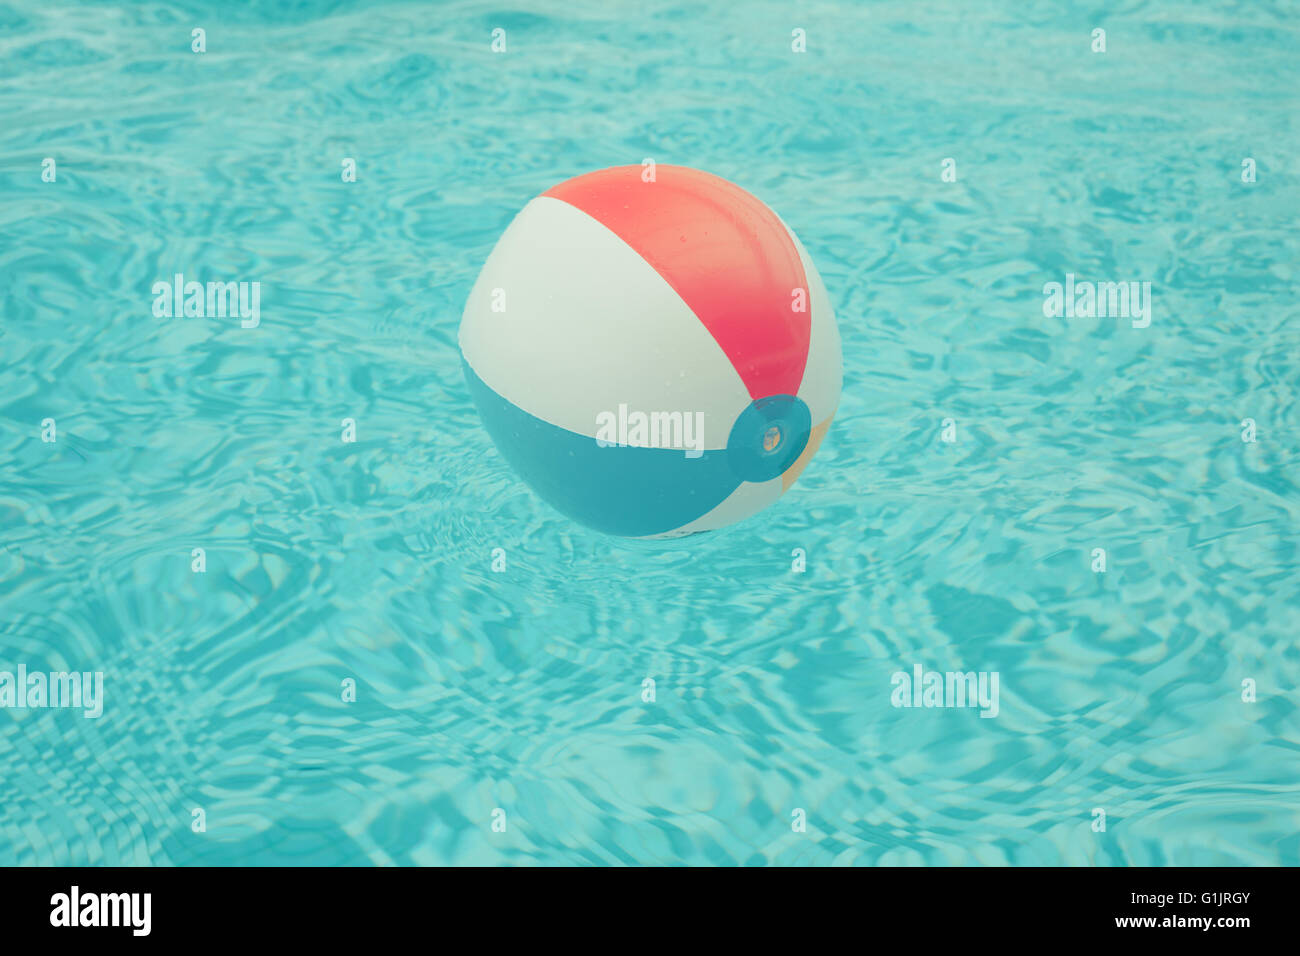 A beach ball is floating in a swimming pool Stock Photo